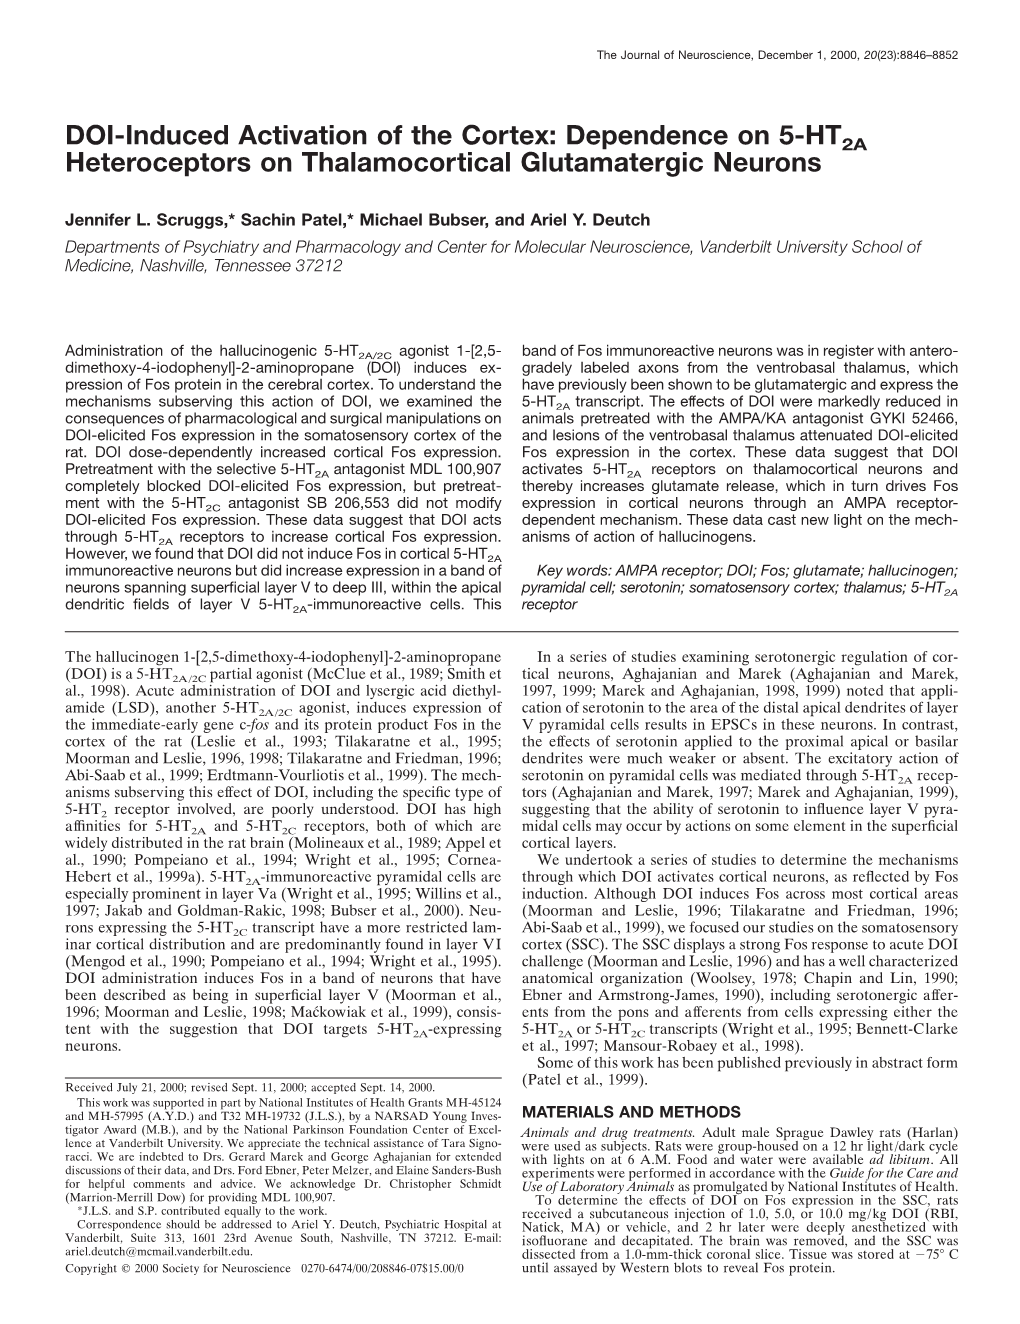 DOI-Induced Activation of the Cortex: Dependence on 5-HT2A Heteroceptors on Thalamocortical Glutamatergic Neurons